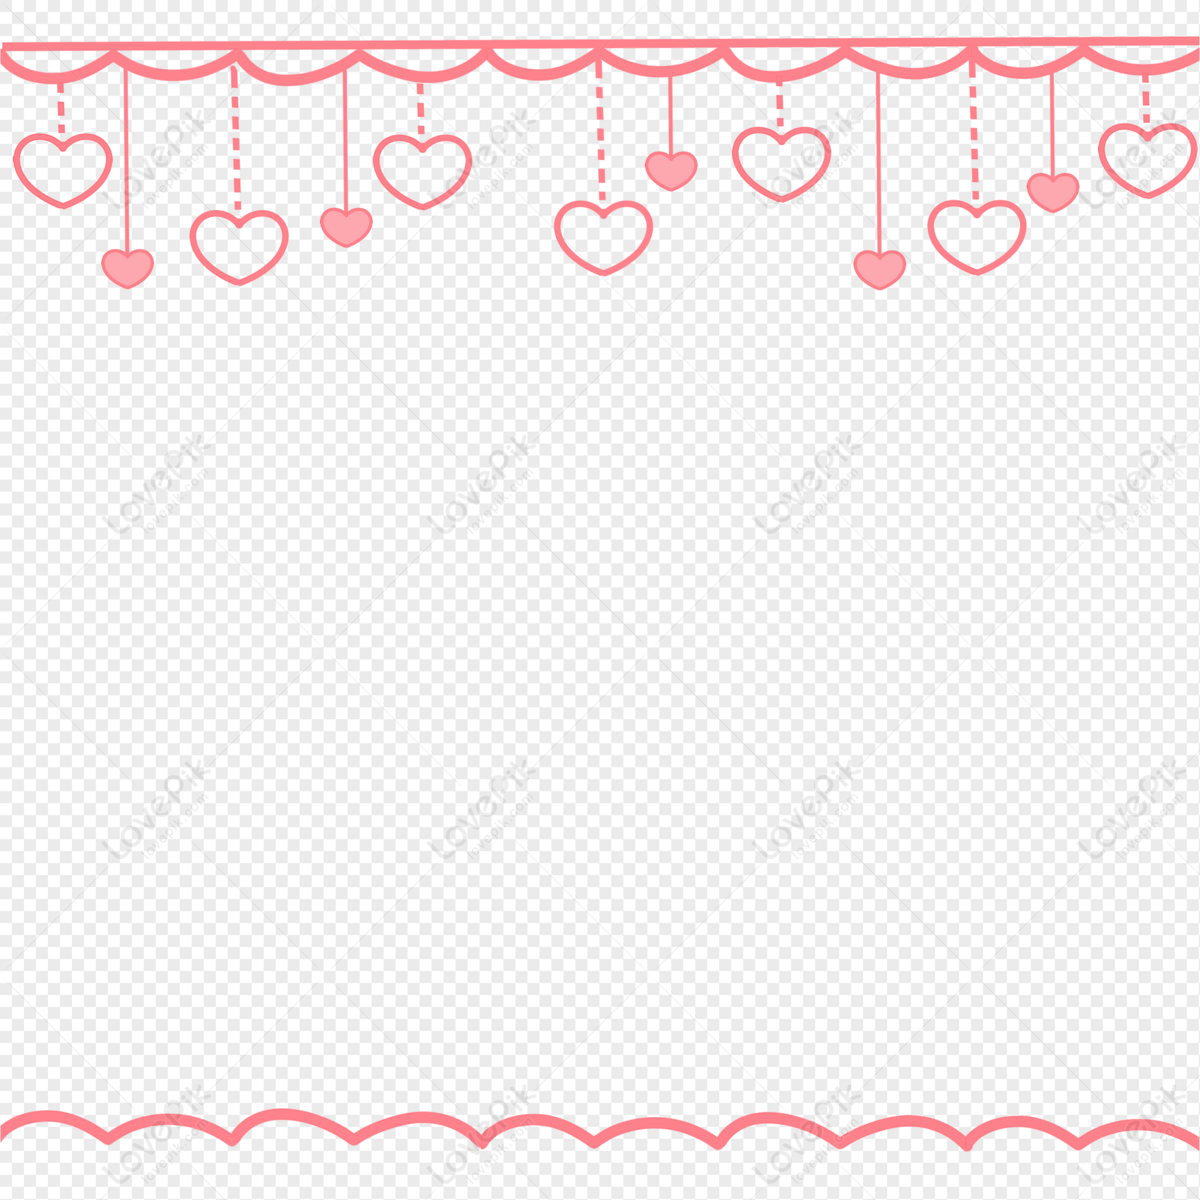 Heart Border PNG Transparent Background And Clipart Image For Free Download  - Lovepik | 401442080